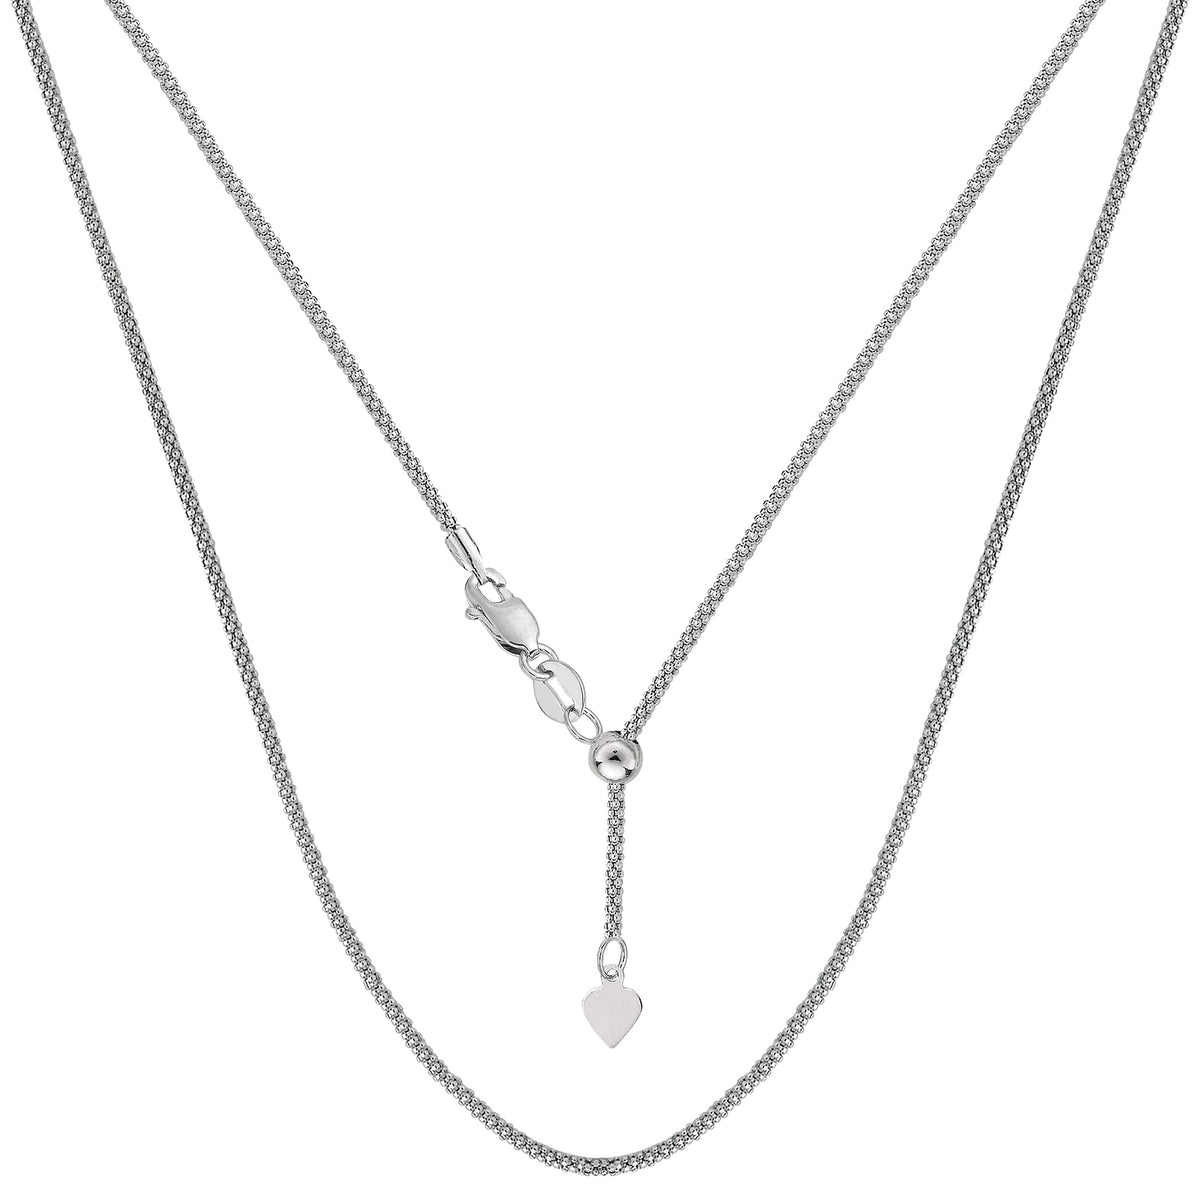 14k White Gold Adjustable Popcorn Link Chain Necklace, 1.3mm, 22" fine designer jewelry for men and women